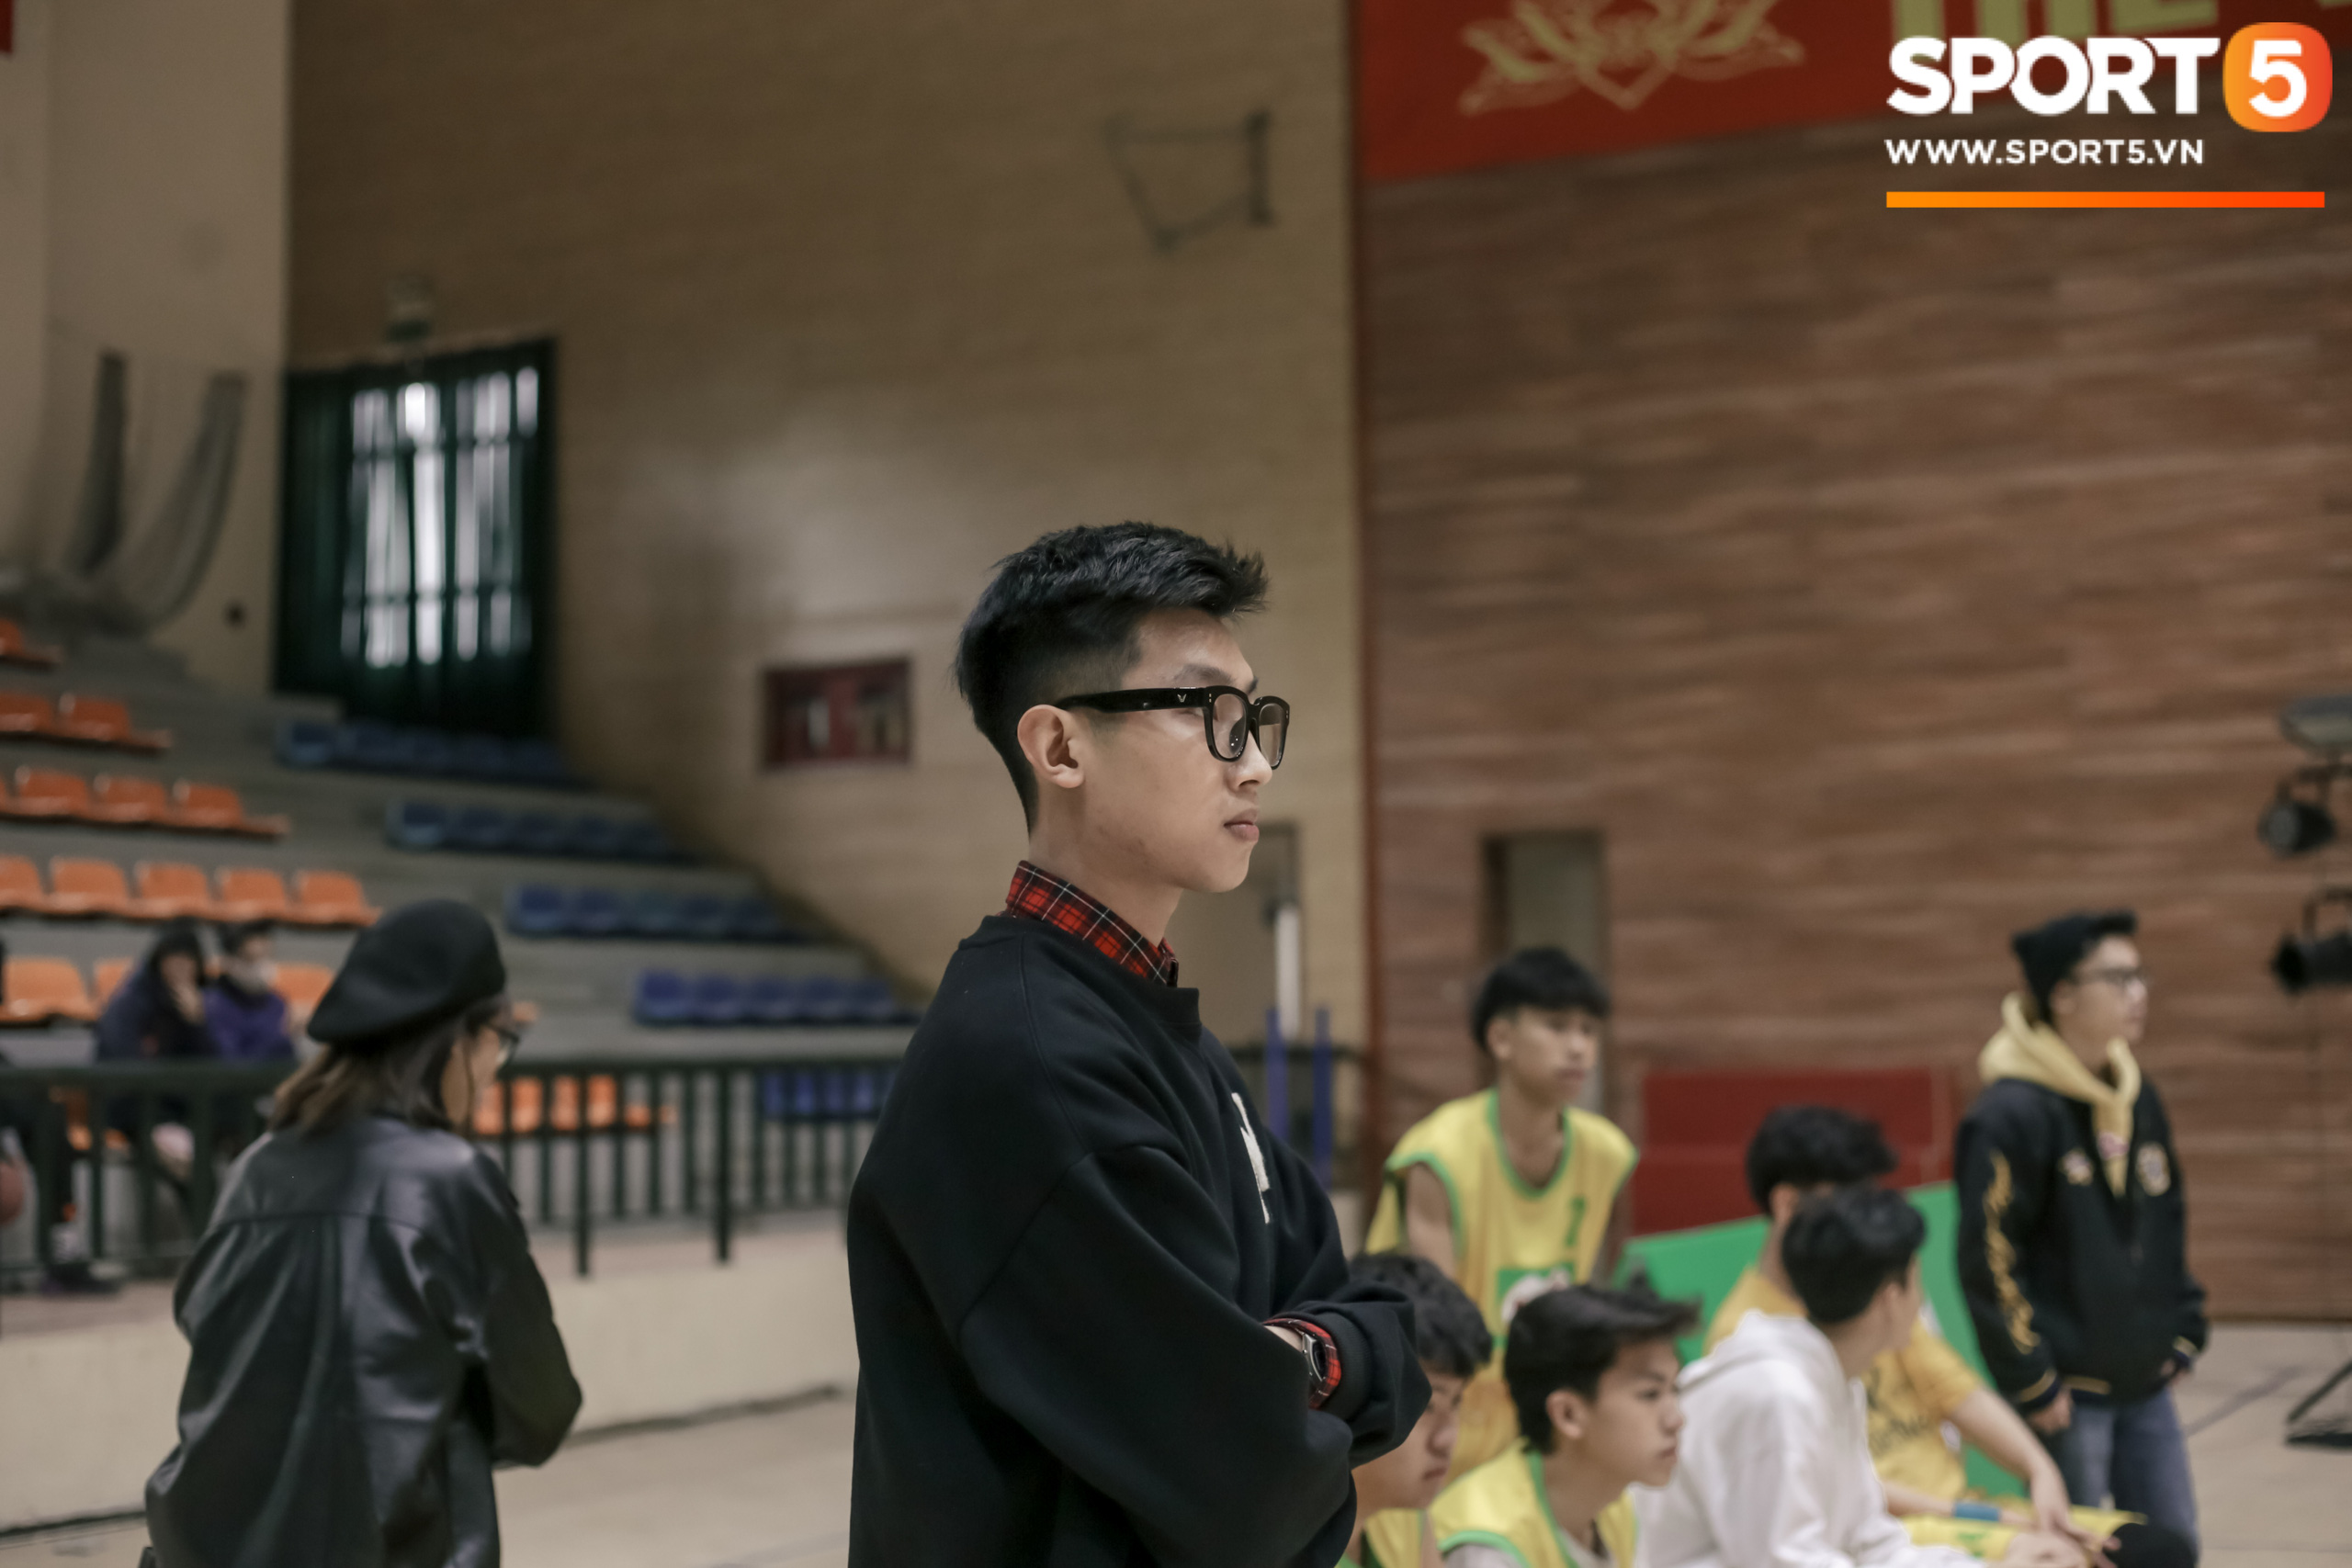 The Xuan Mai High School basketball team caused a fever with great images, after a bad salary hit everyone with a heart attack - Photo 4.